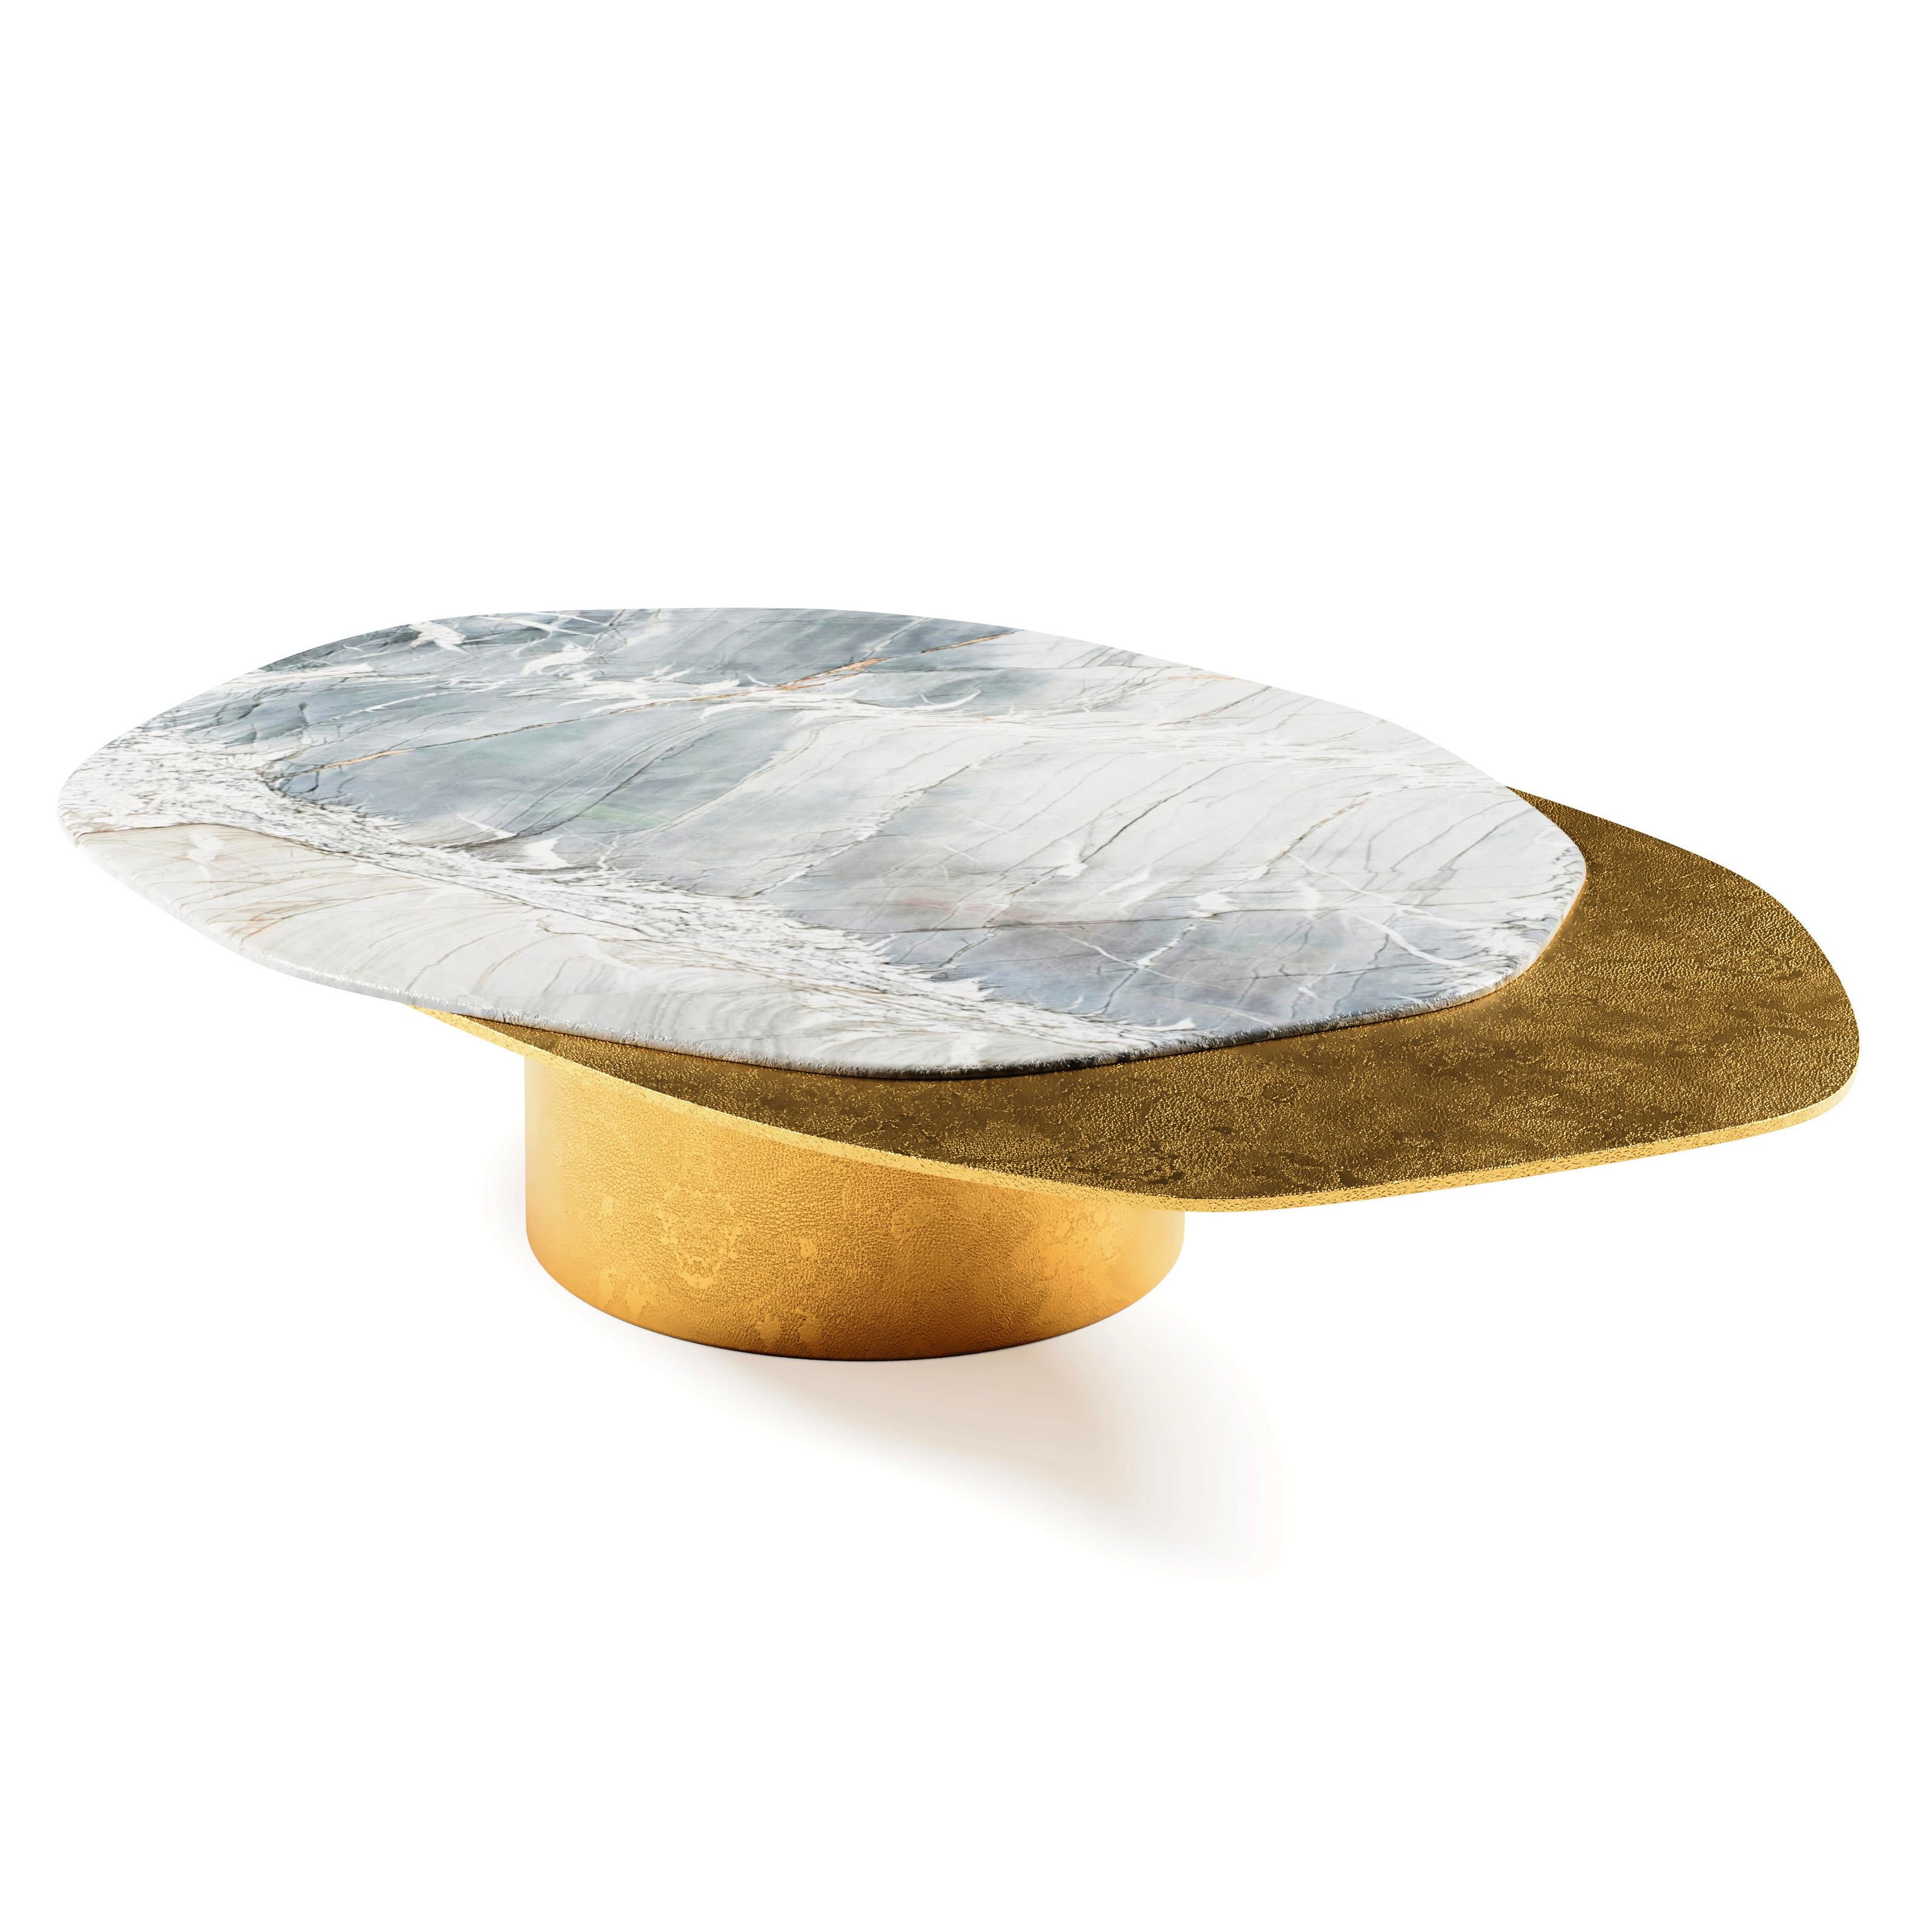 The epicure coffee table, 1 of 1 by Grzegorz Majka
Edition 1 of 1
Dimensions: 58 x 40 x 13 in
Materials: Aluminium, quartz and brass

“No man is an island entire of itself; every man is a piece of the continent, a part of the main.” The phrase